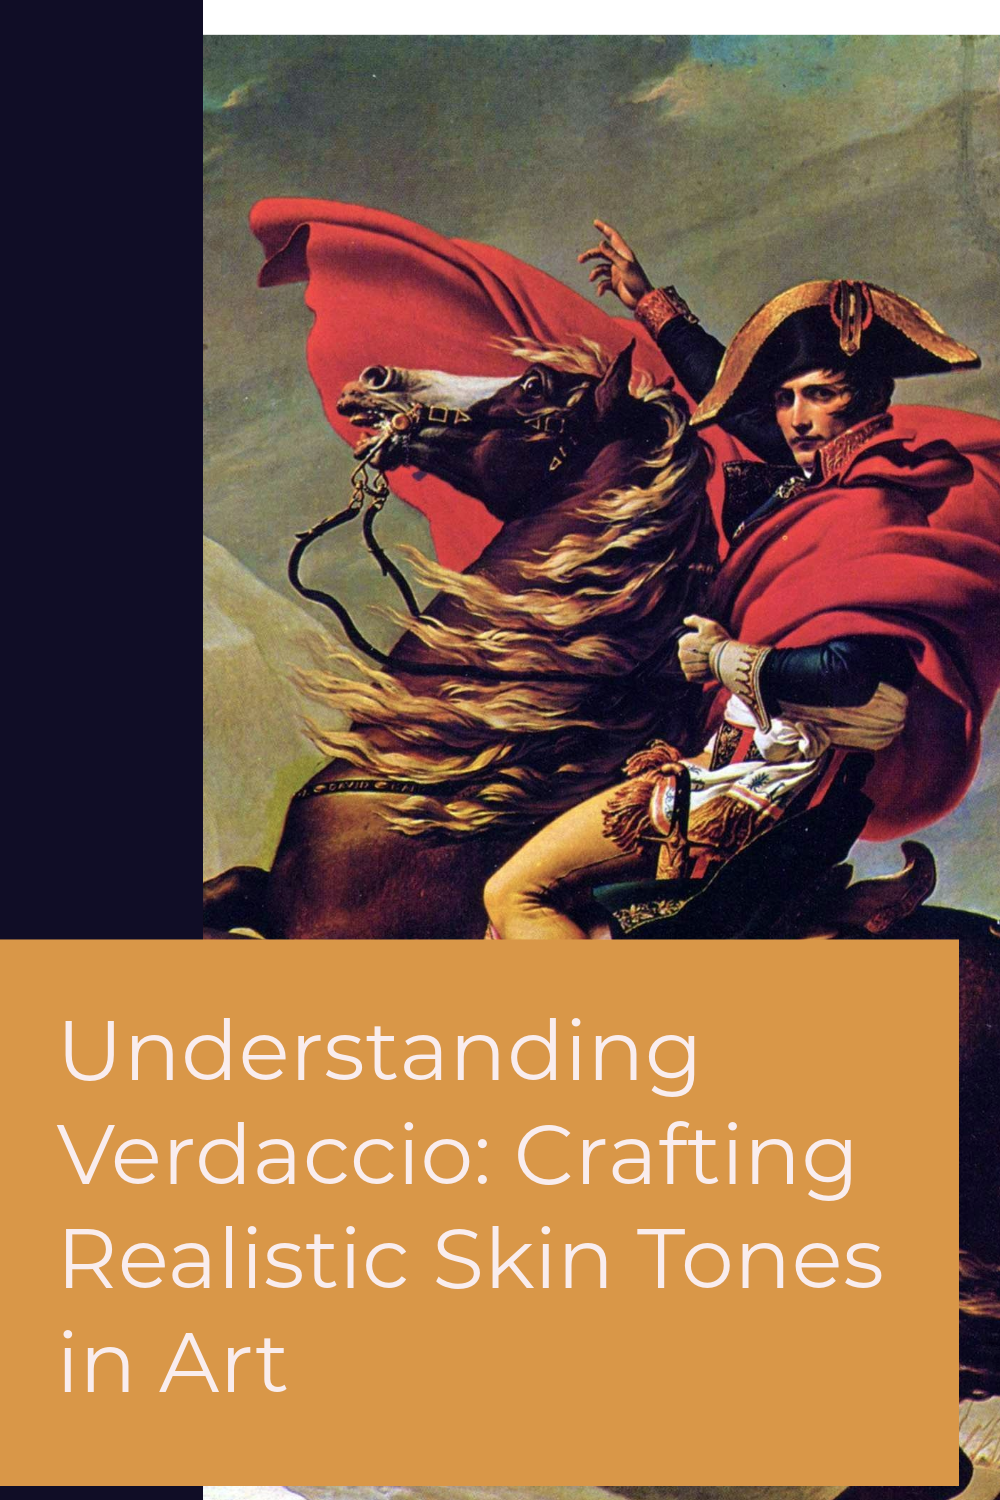 You are currently viewing Understanding Verdaccio: Crafting Realistic Skin Tones in Art